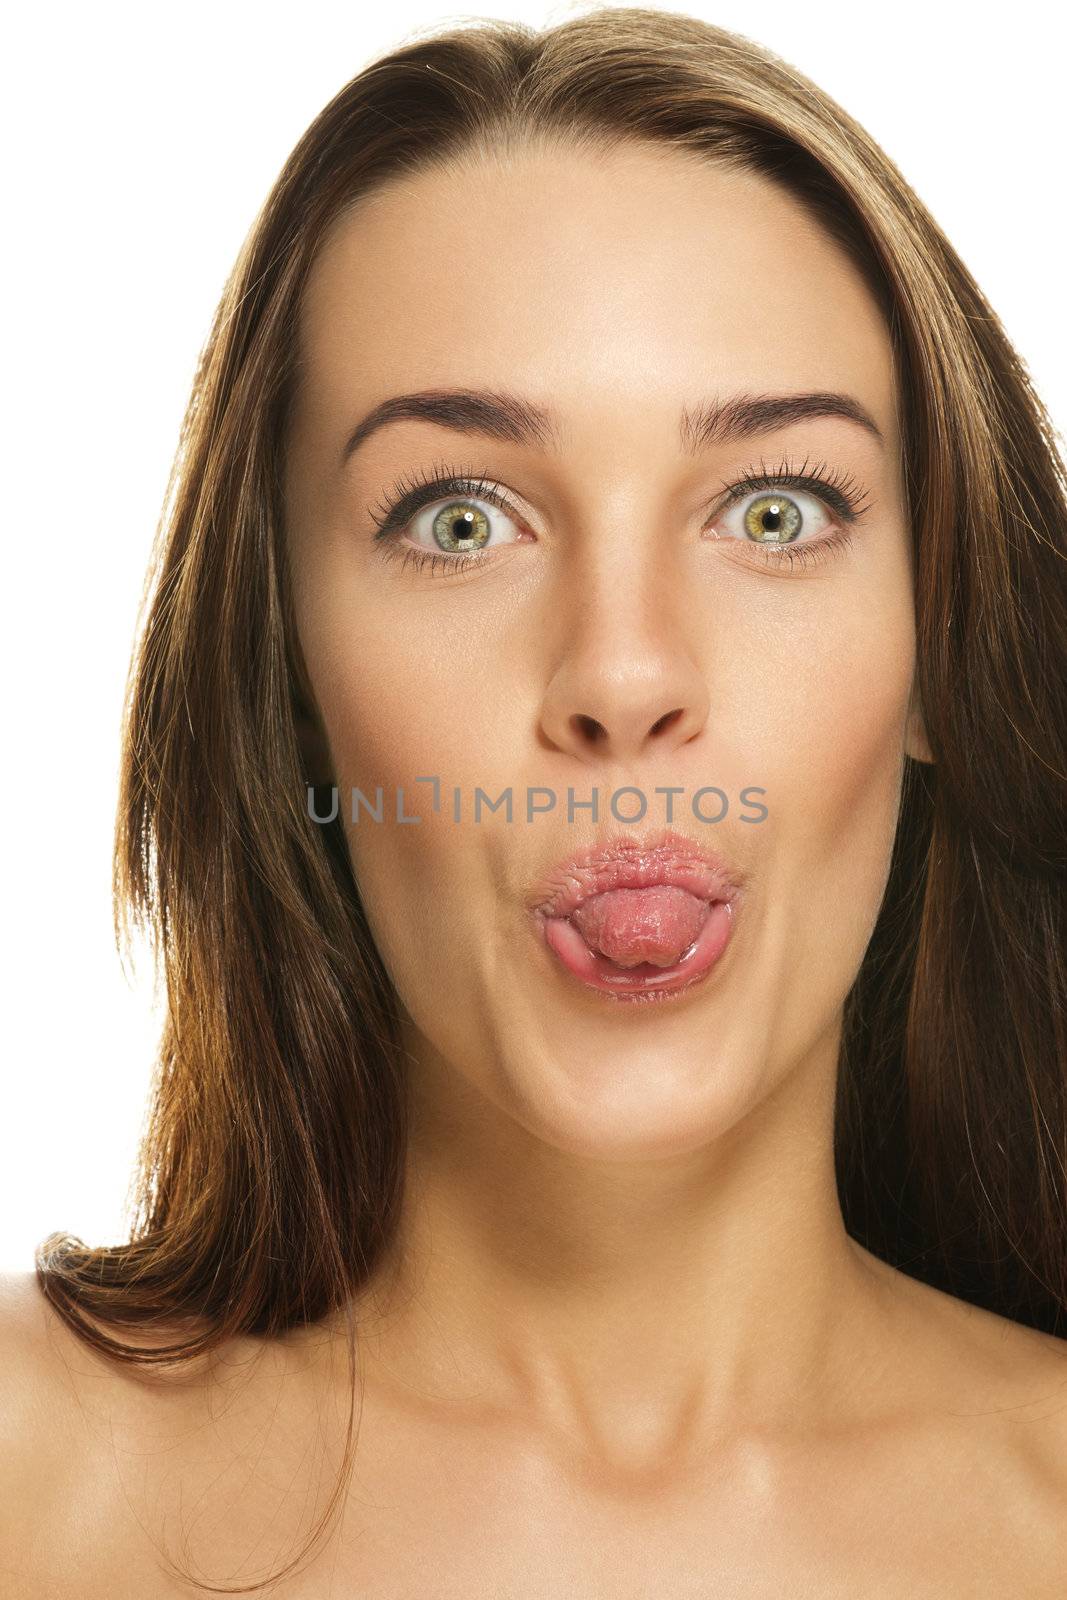 beautiful woman poking tongue out by RobStark